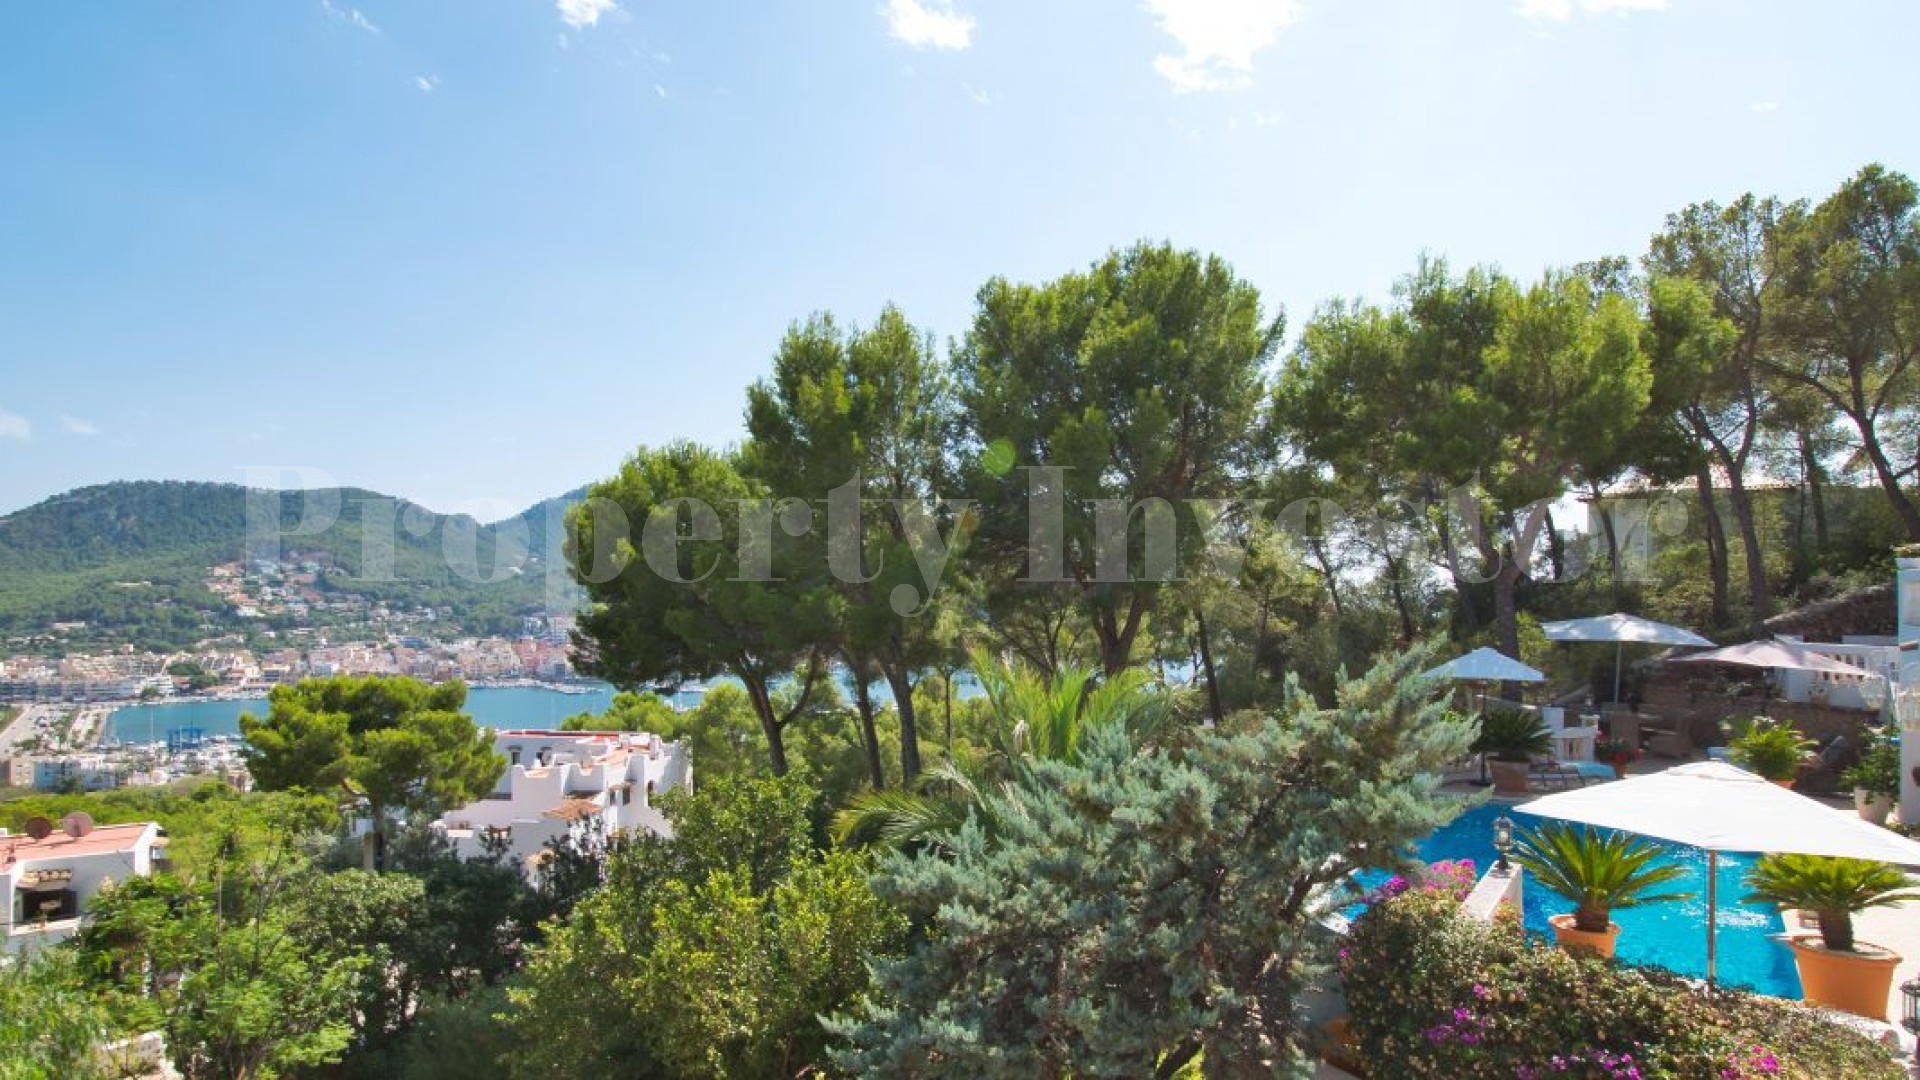 6 Bedroom Mediterranean Villa with Guest House Within Walking Distance to the Port